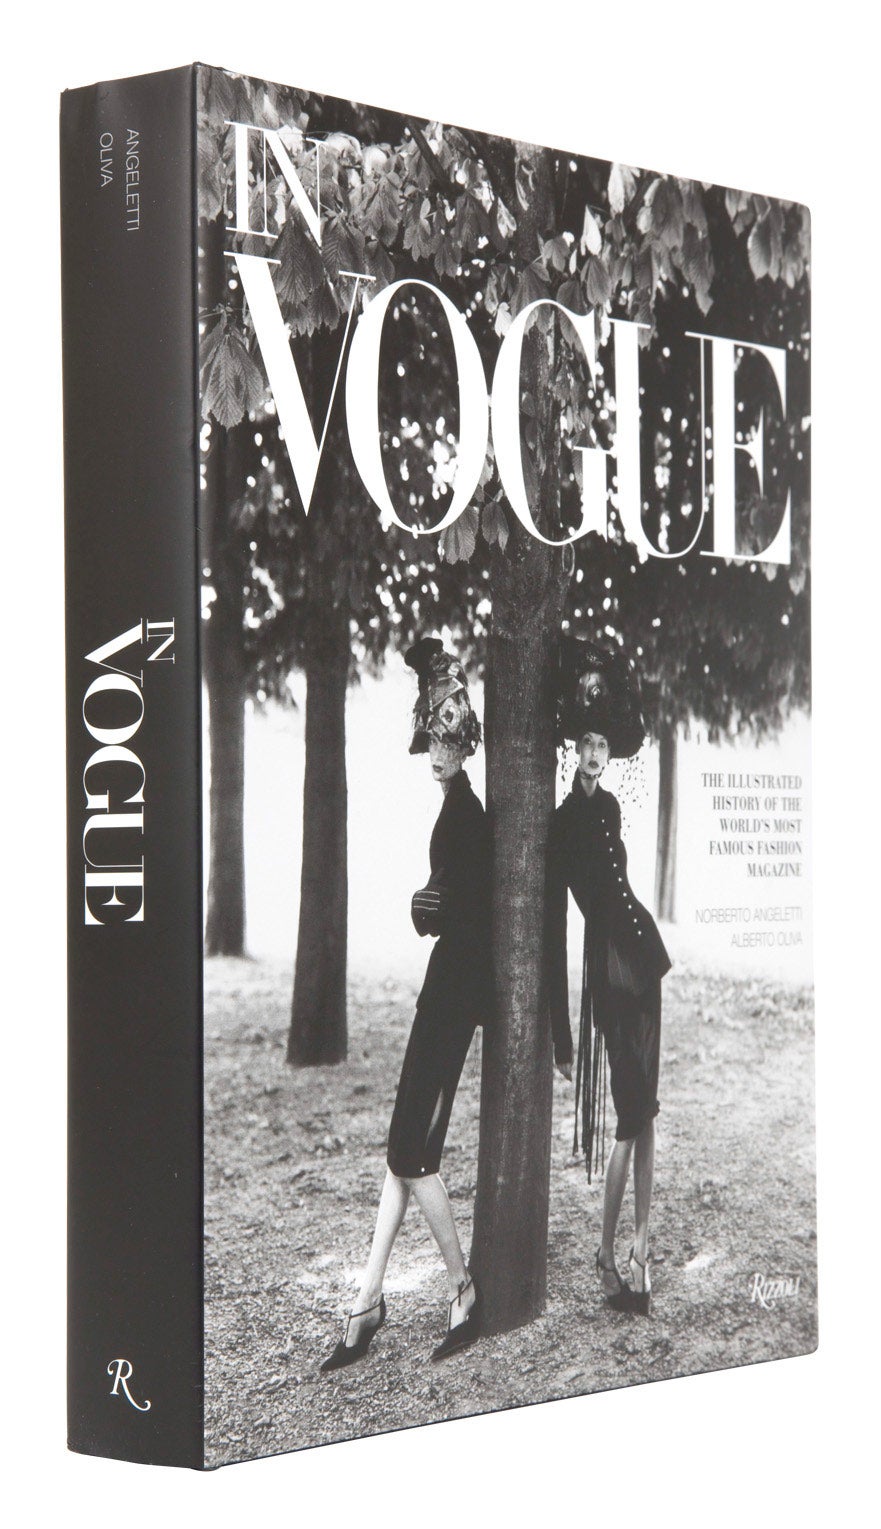 In Vogue: An Illustrated History of the World's Most Famous Fashion Magazine [Book]